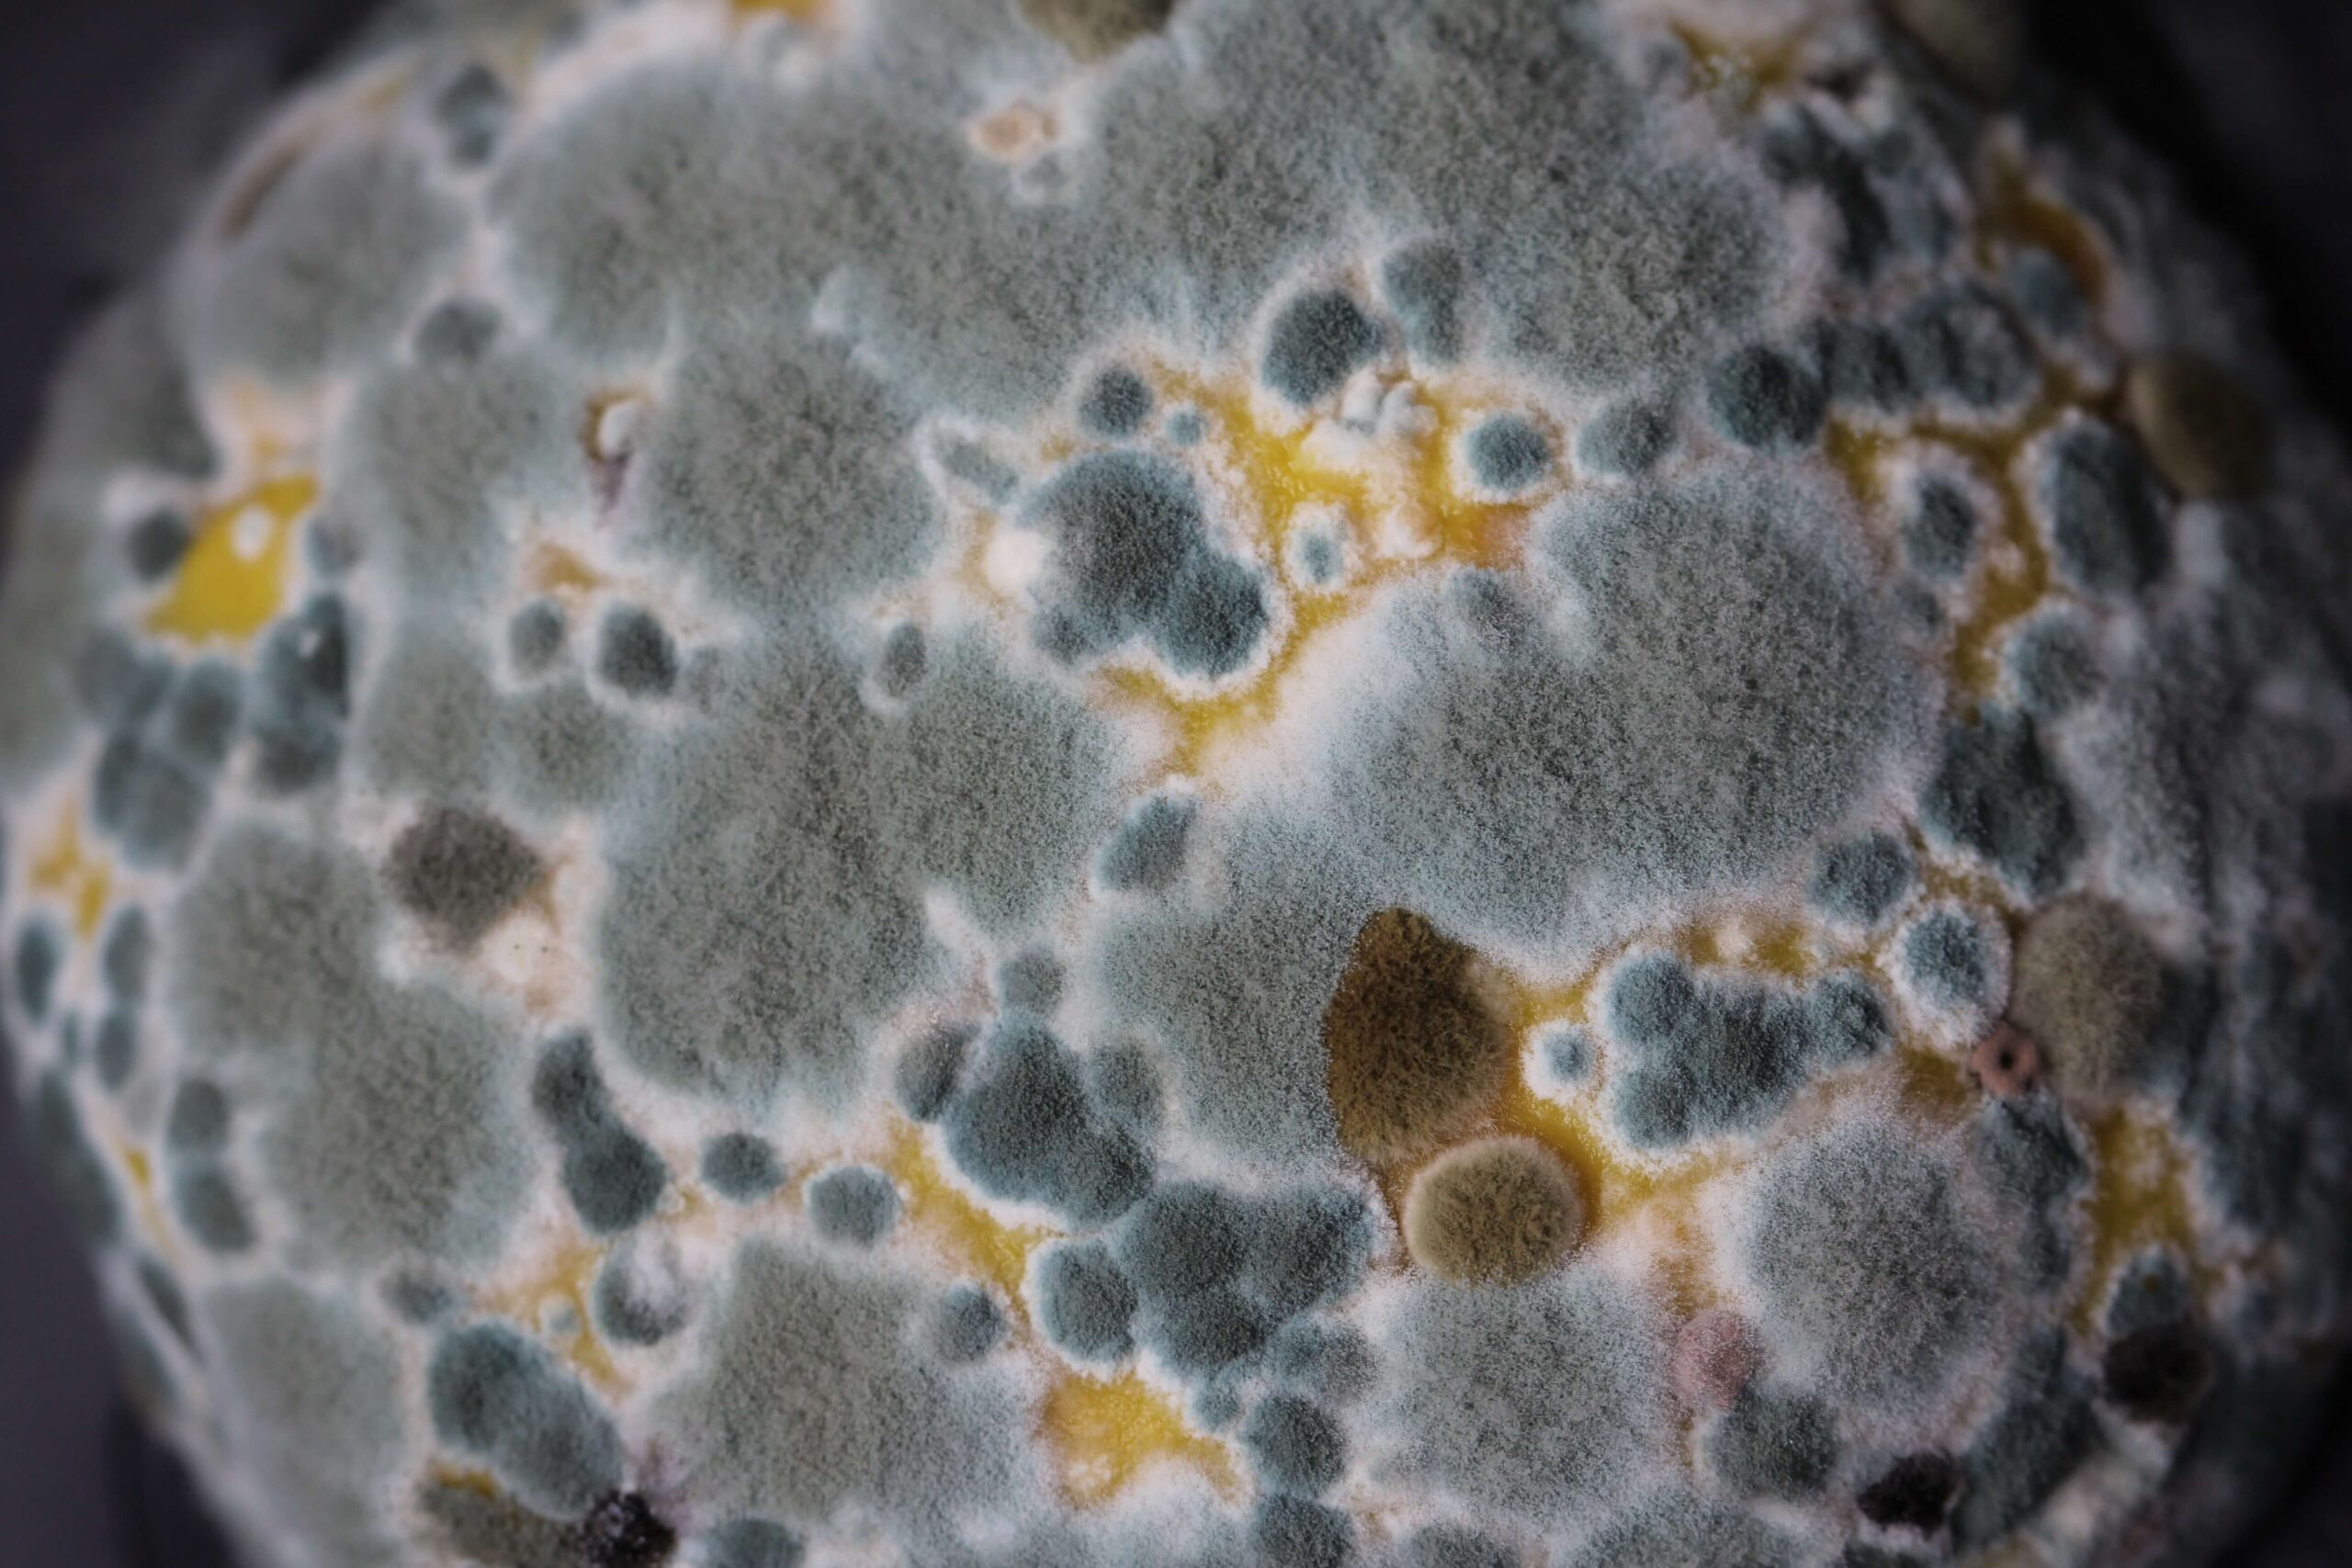 magnified view of mold spore